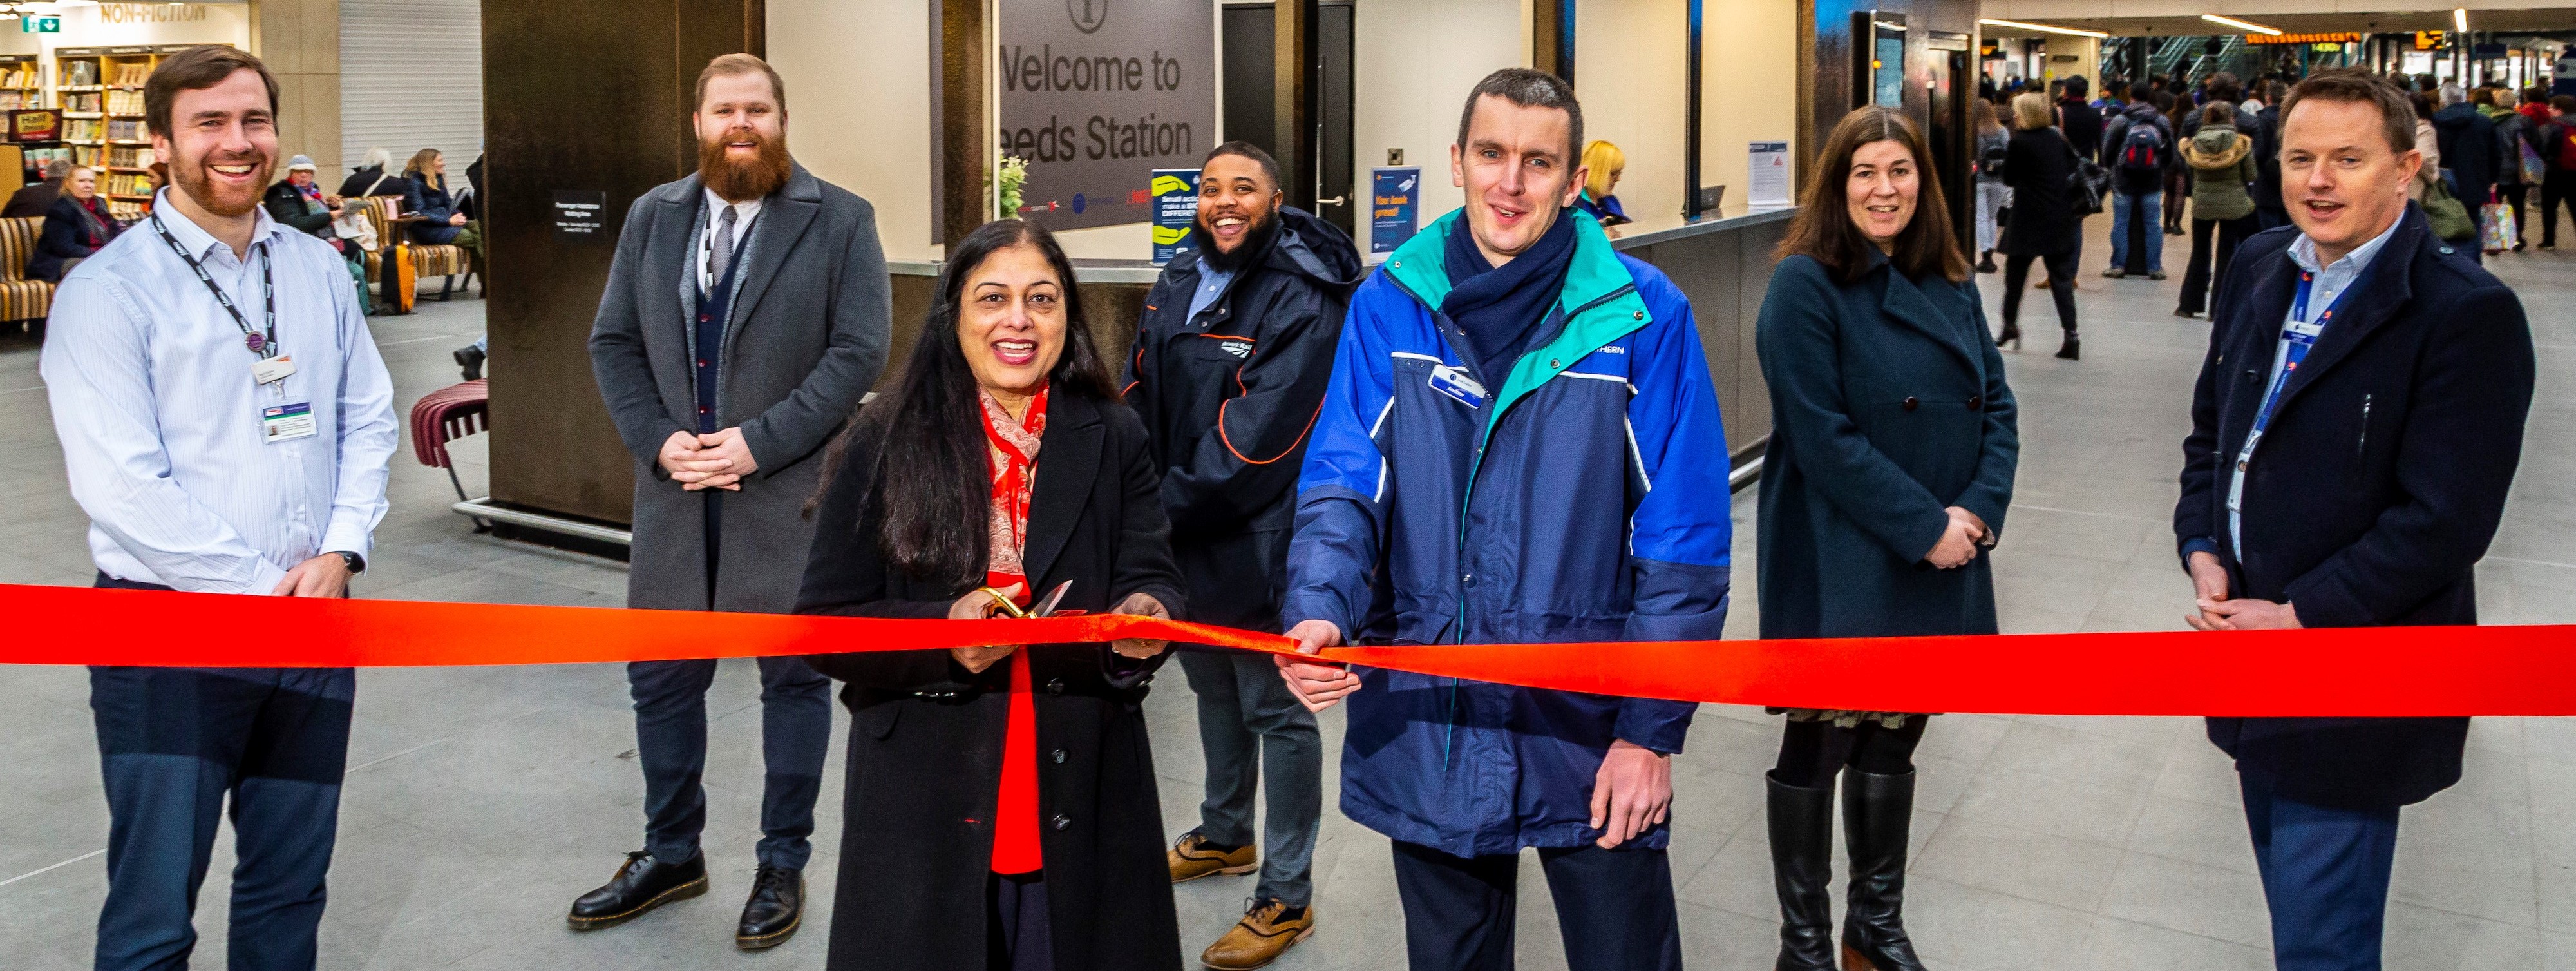 staff-open-the-new-customer-information-point-at-leeds-station